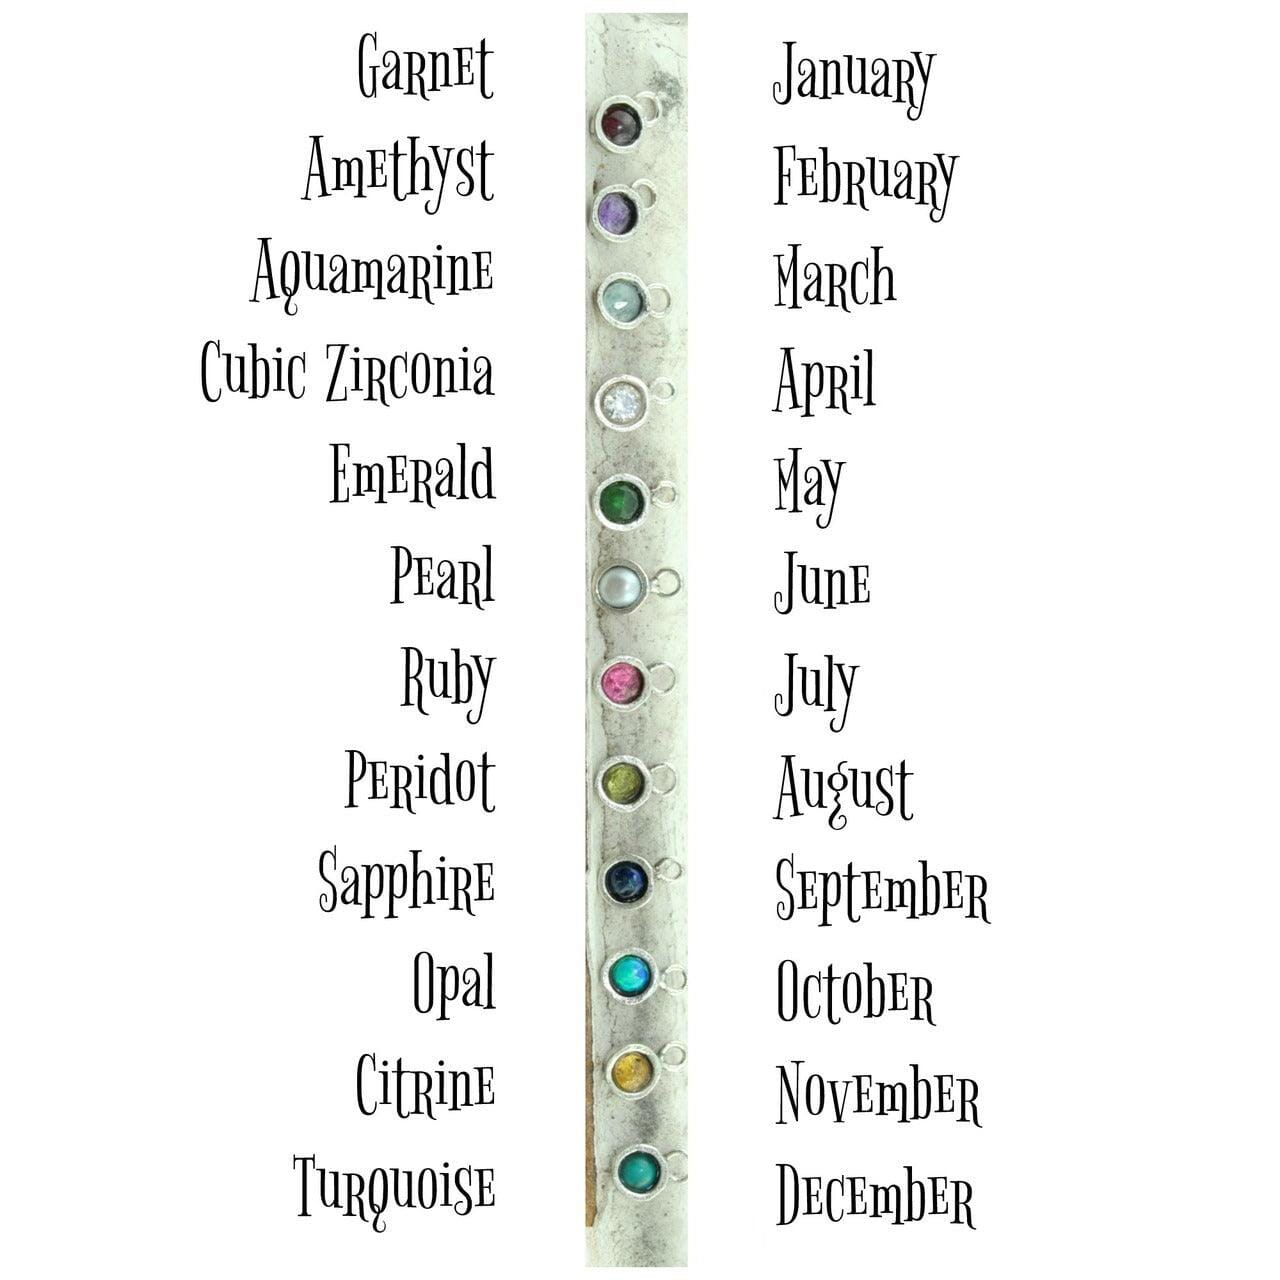 Colored birthstone and CZ option chart